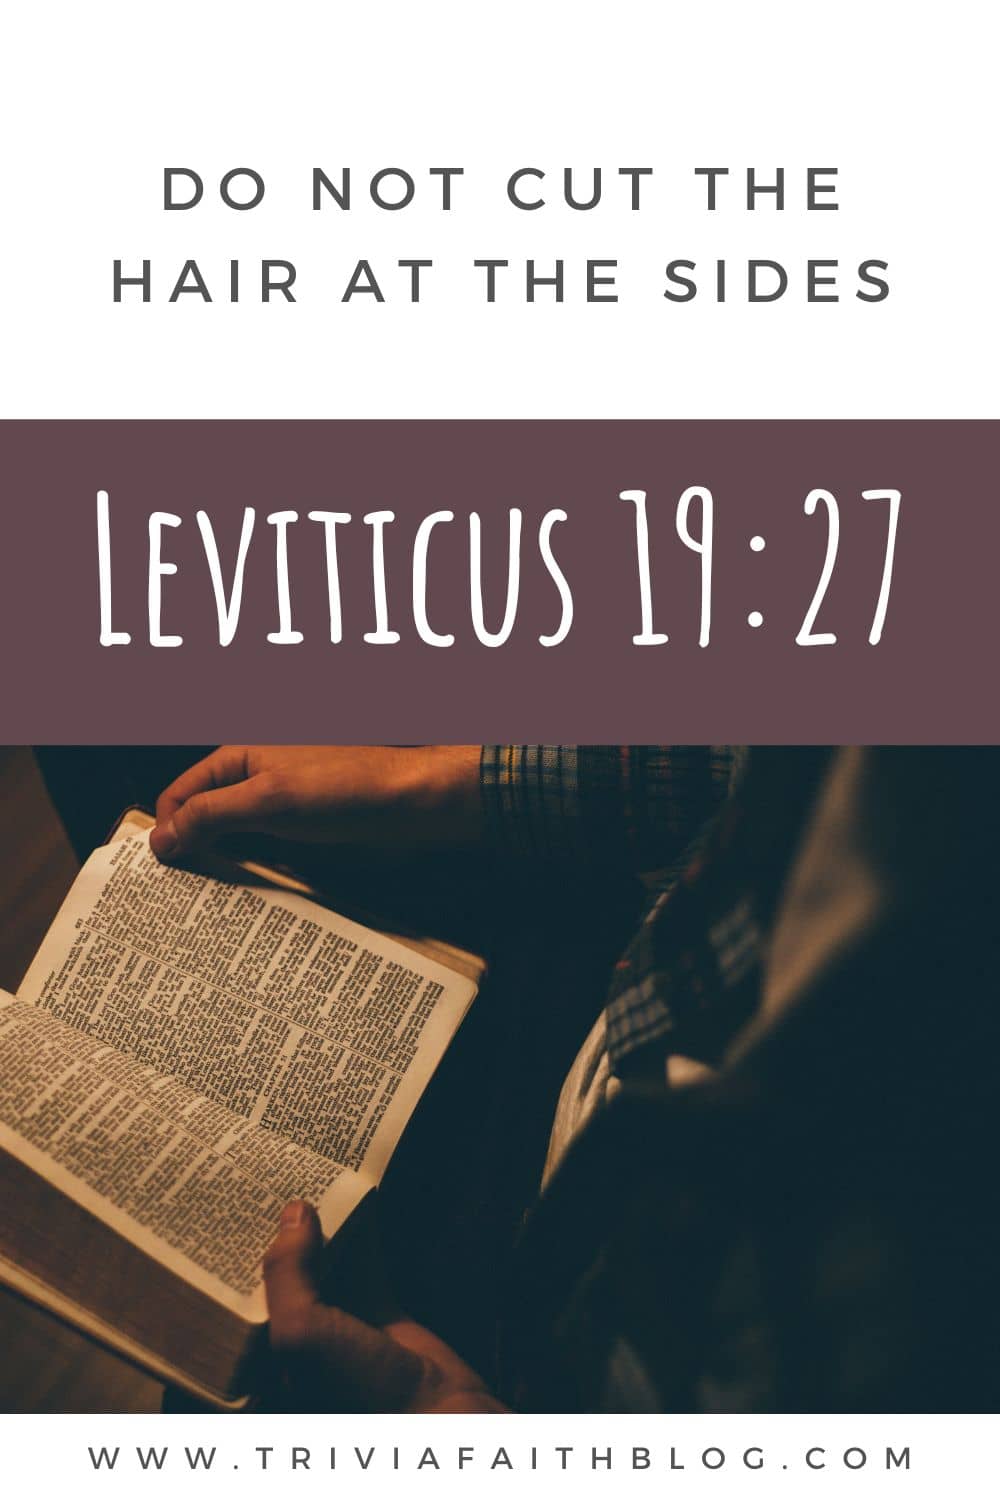 Leviticus 19:27 Meaning - Do Not Cut the Hair At The Sides